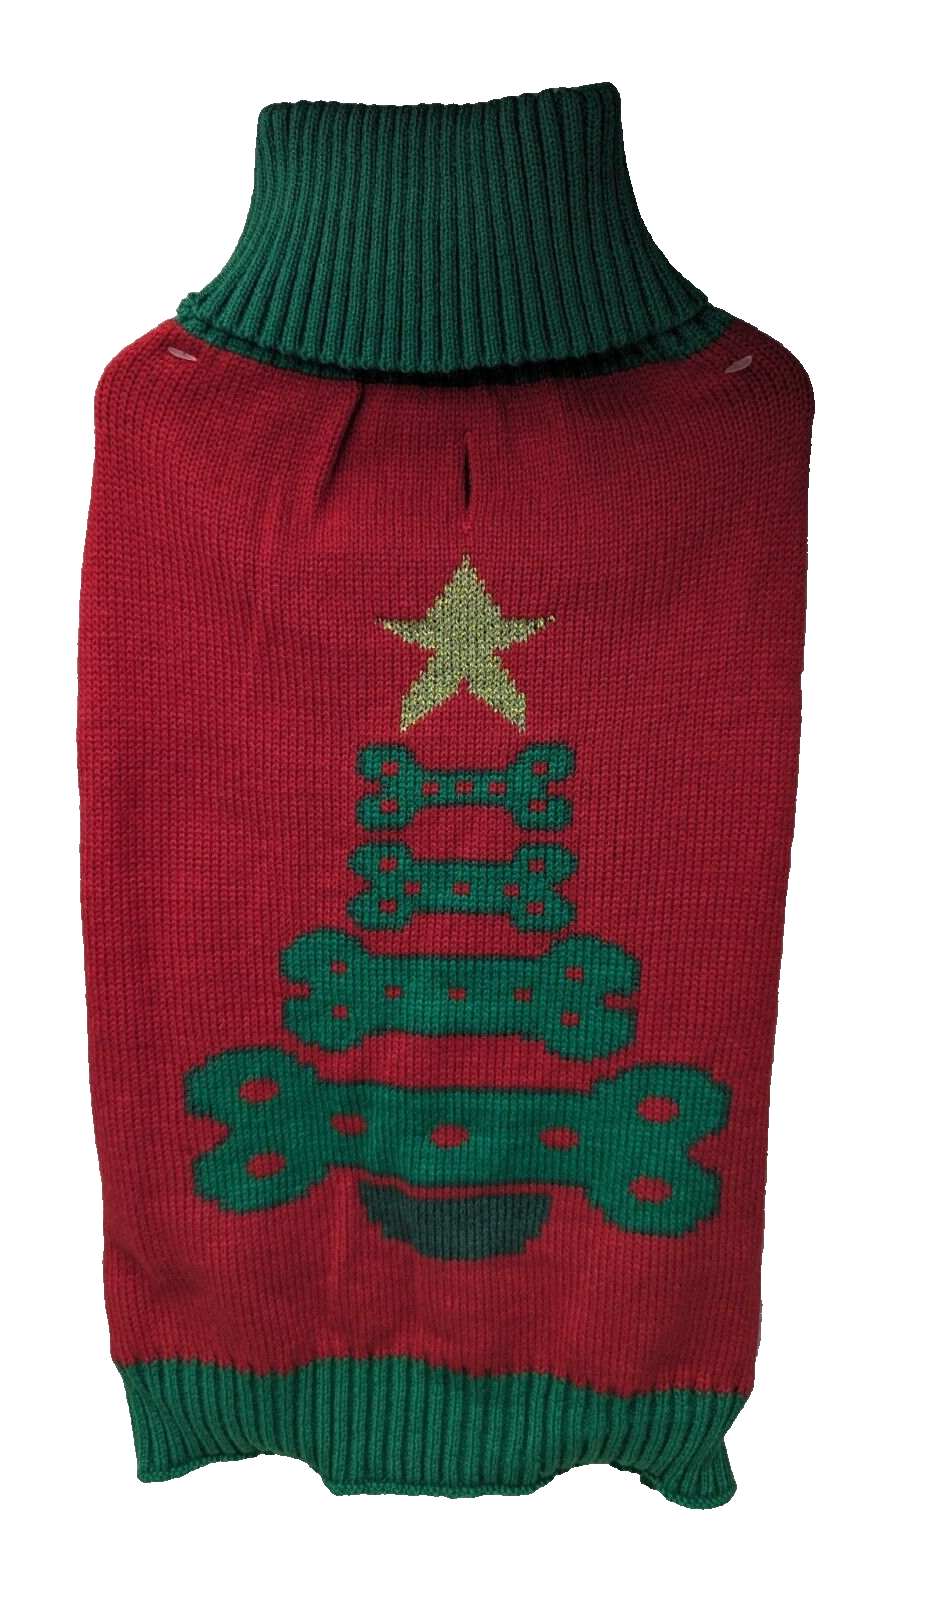 Primary image for Winter Dog Clothes sweater red green boned Christmas Tree gold star M Medium